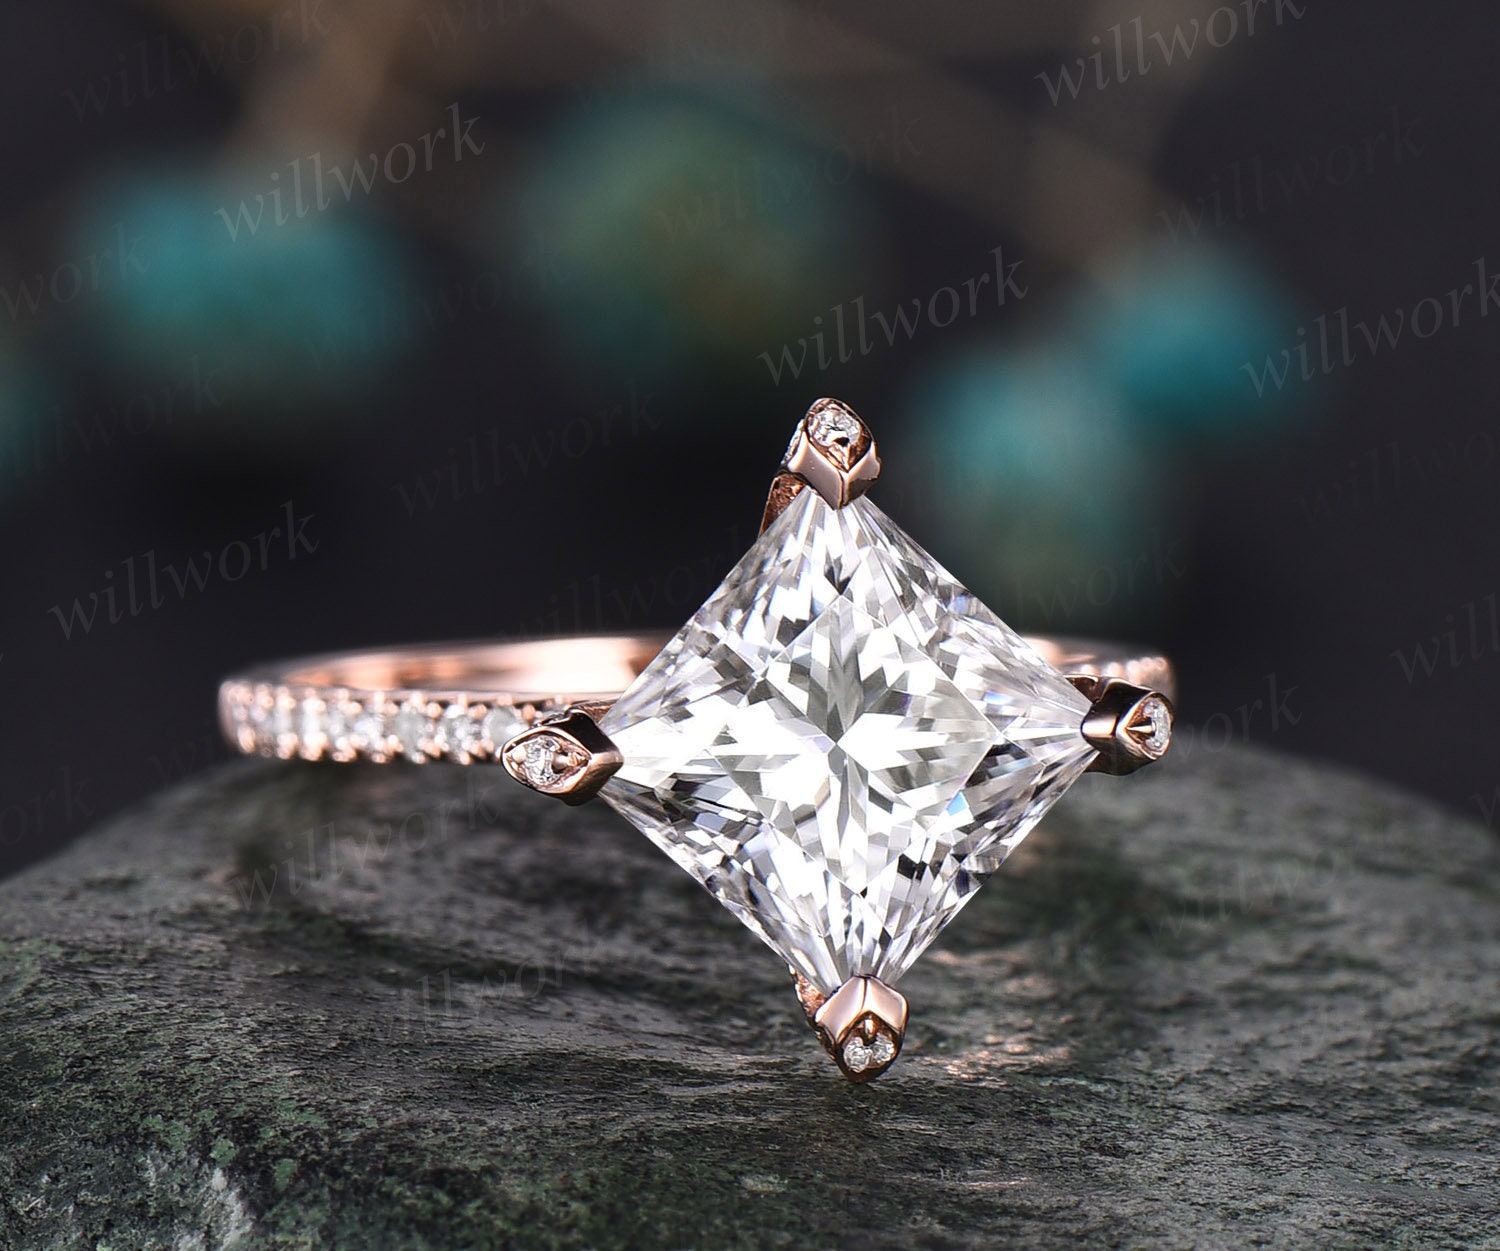 Diamond Bands and Wedding Rings of All Types - Know How To Buy - Only  Natural Diamonds Wedding Rings and Diamond Bands - Only Natural Diamonds